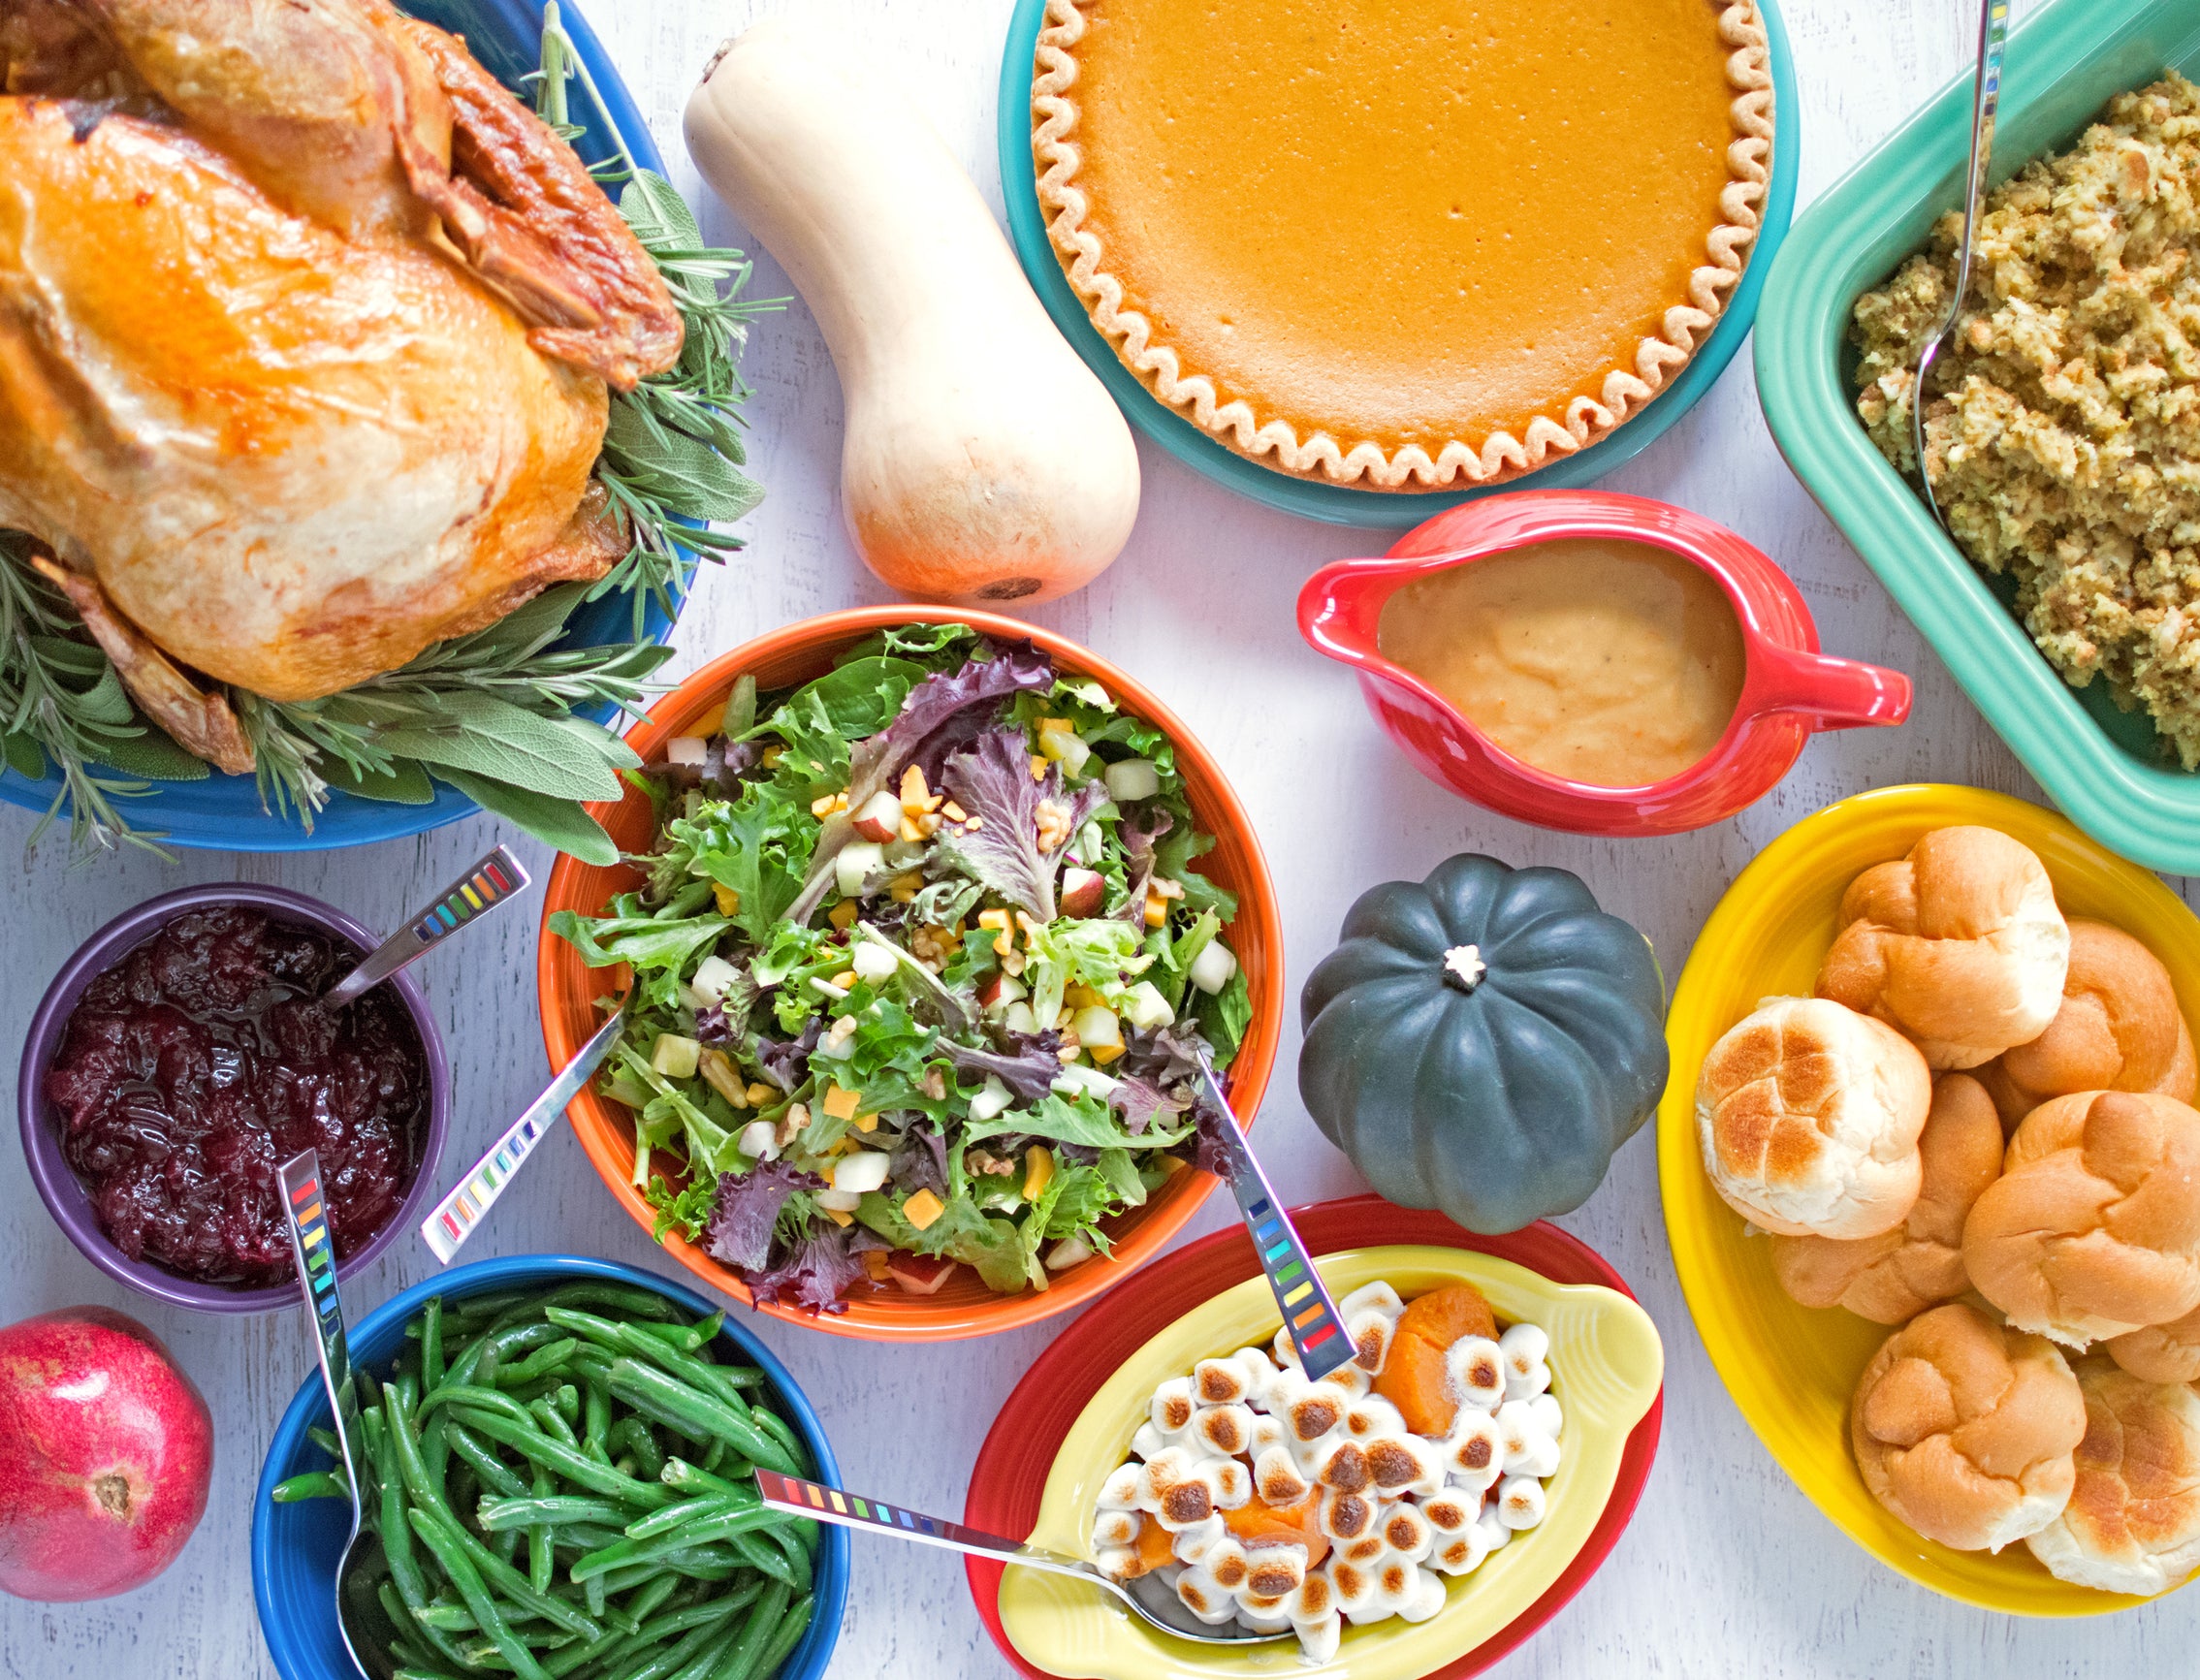 The Ultimate Thanksgiving Feast: A Mouthwatering Turkey and Gravy Recipe to Delight Your Guests